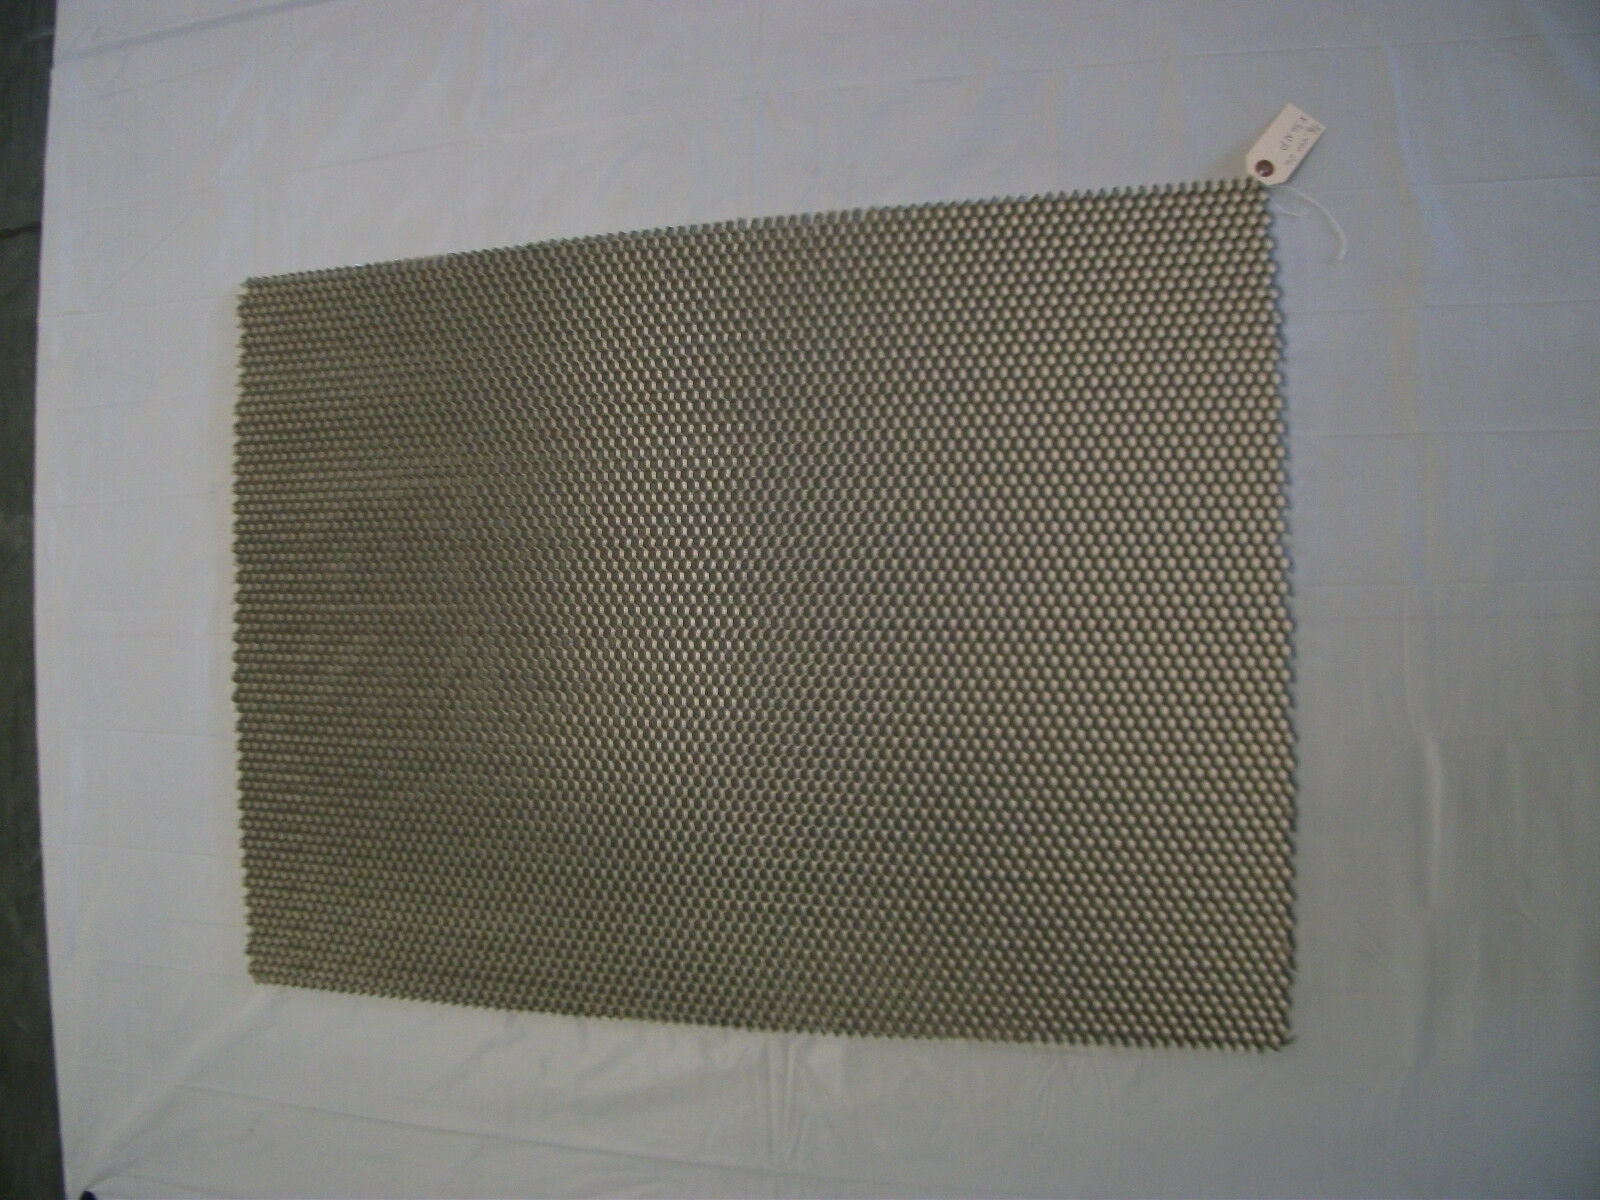 24"x24" T=1.00" 1/4" Cell Laser Bed Replacement Honeycomb Core Sheet